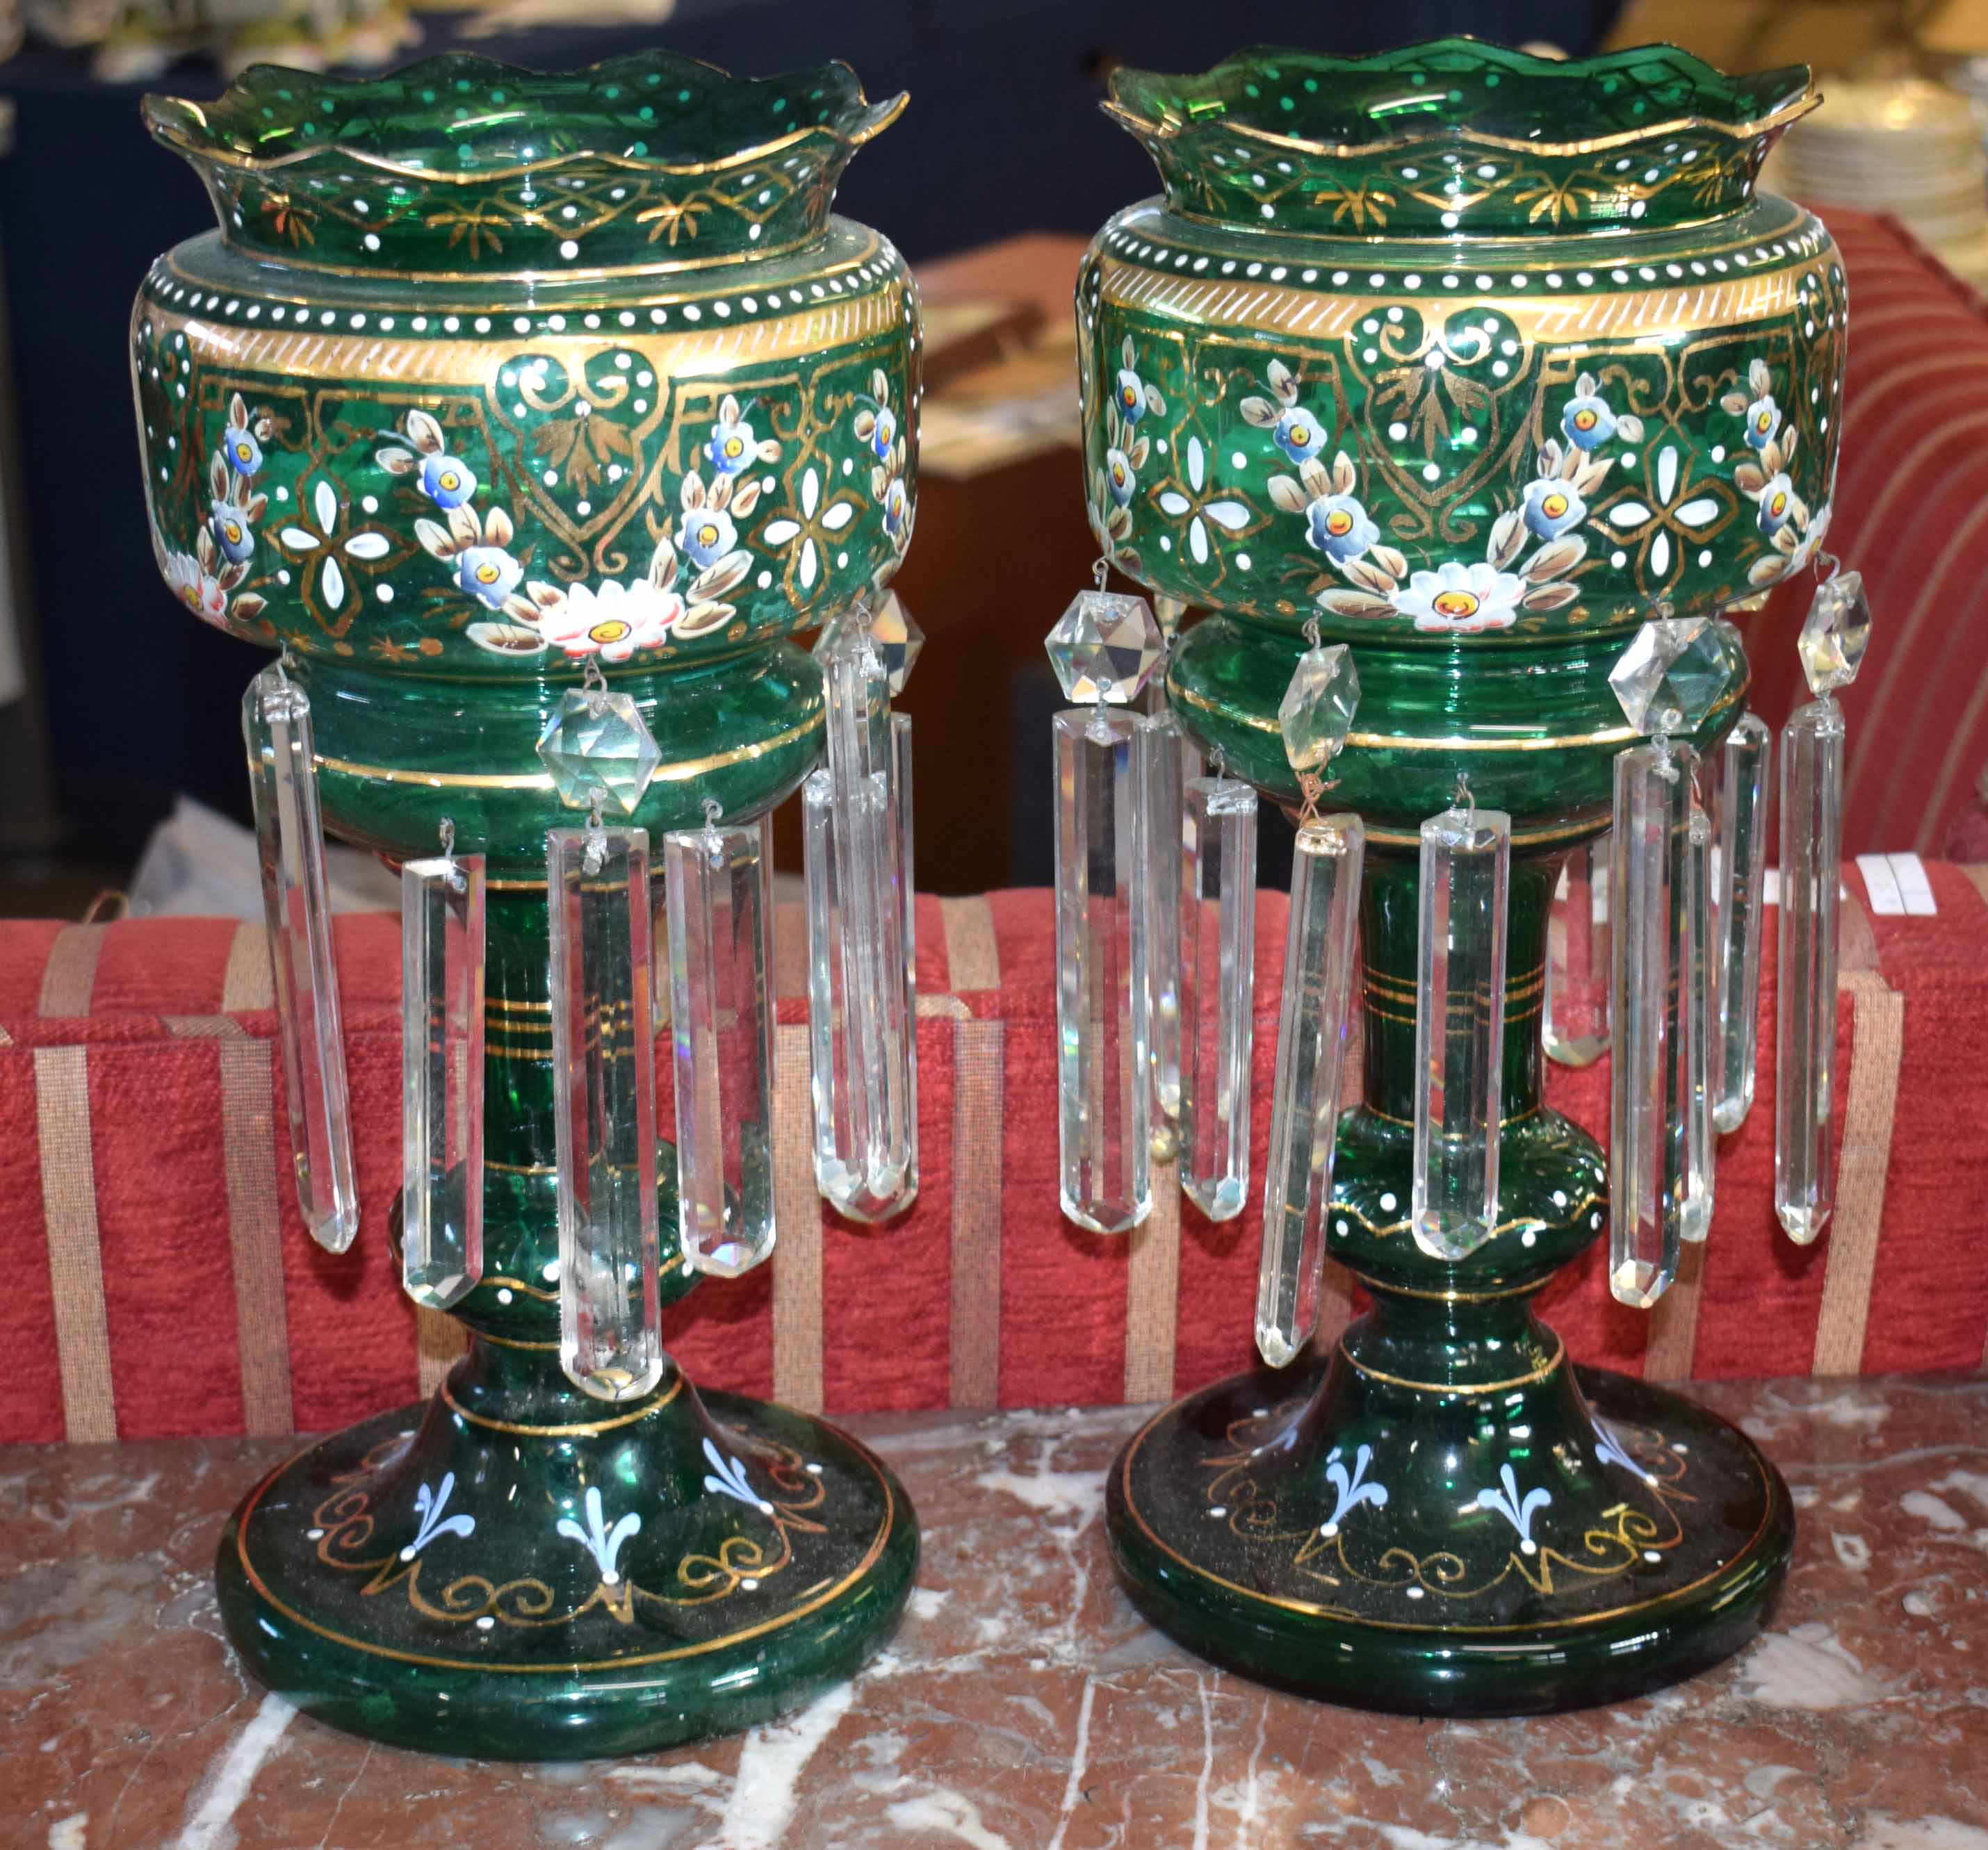 Pair of green glass lustres, decorated with garlands of flowers hand painted in gilt, pale blue